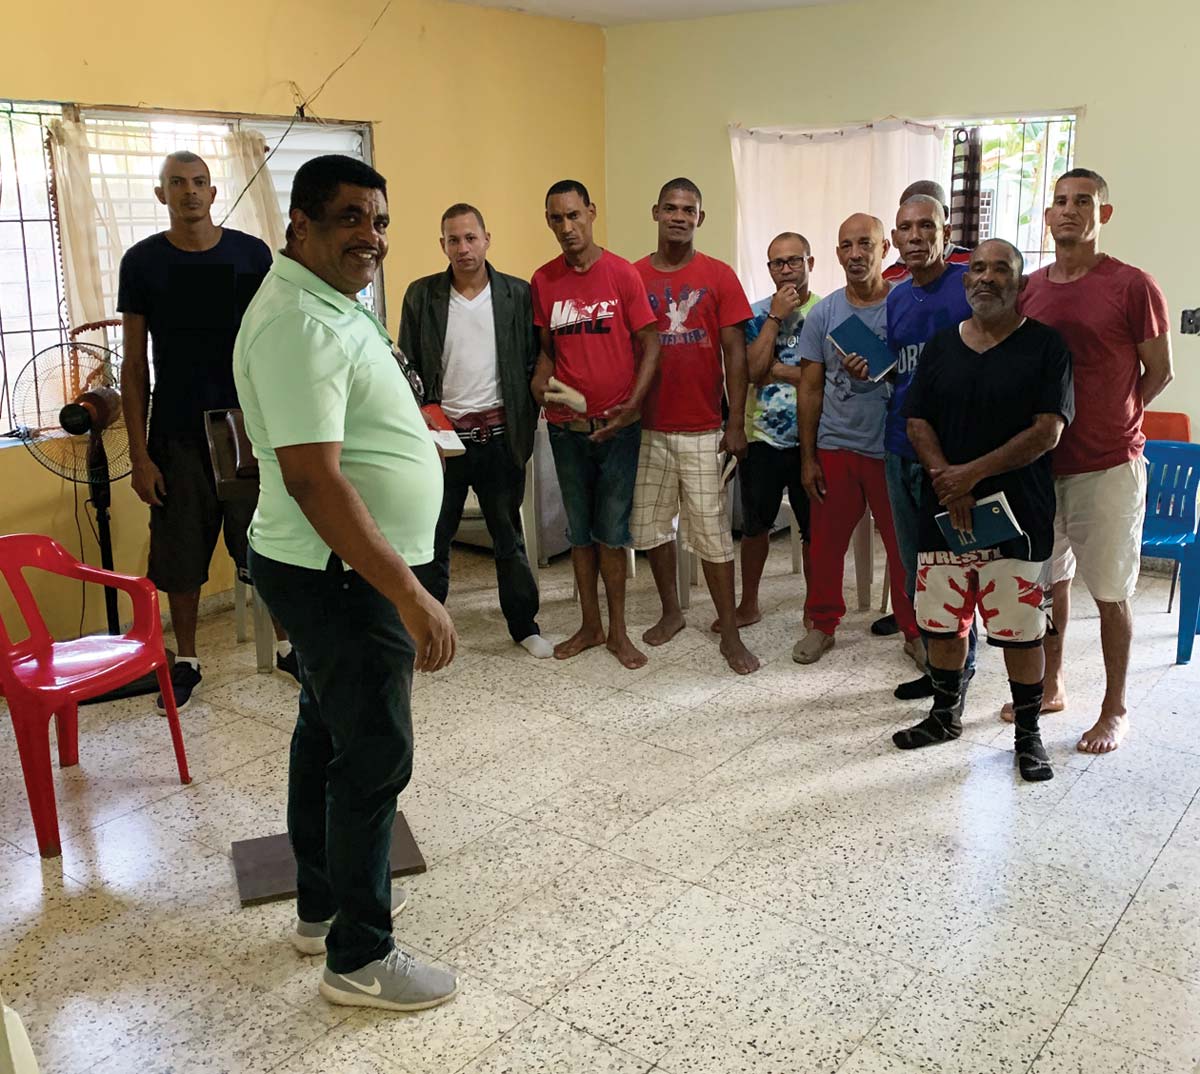 Diomedes Franco (foreground) meets with men in the community of La Vega. Photo courtesy of Diomedes Franco